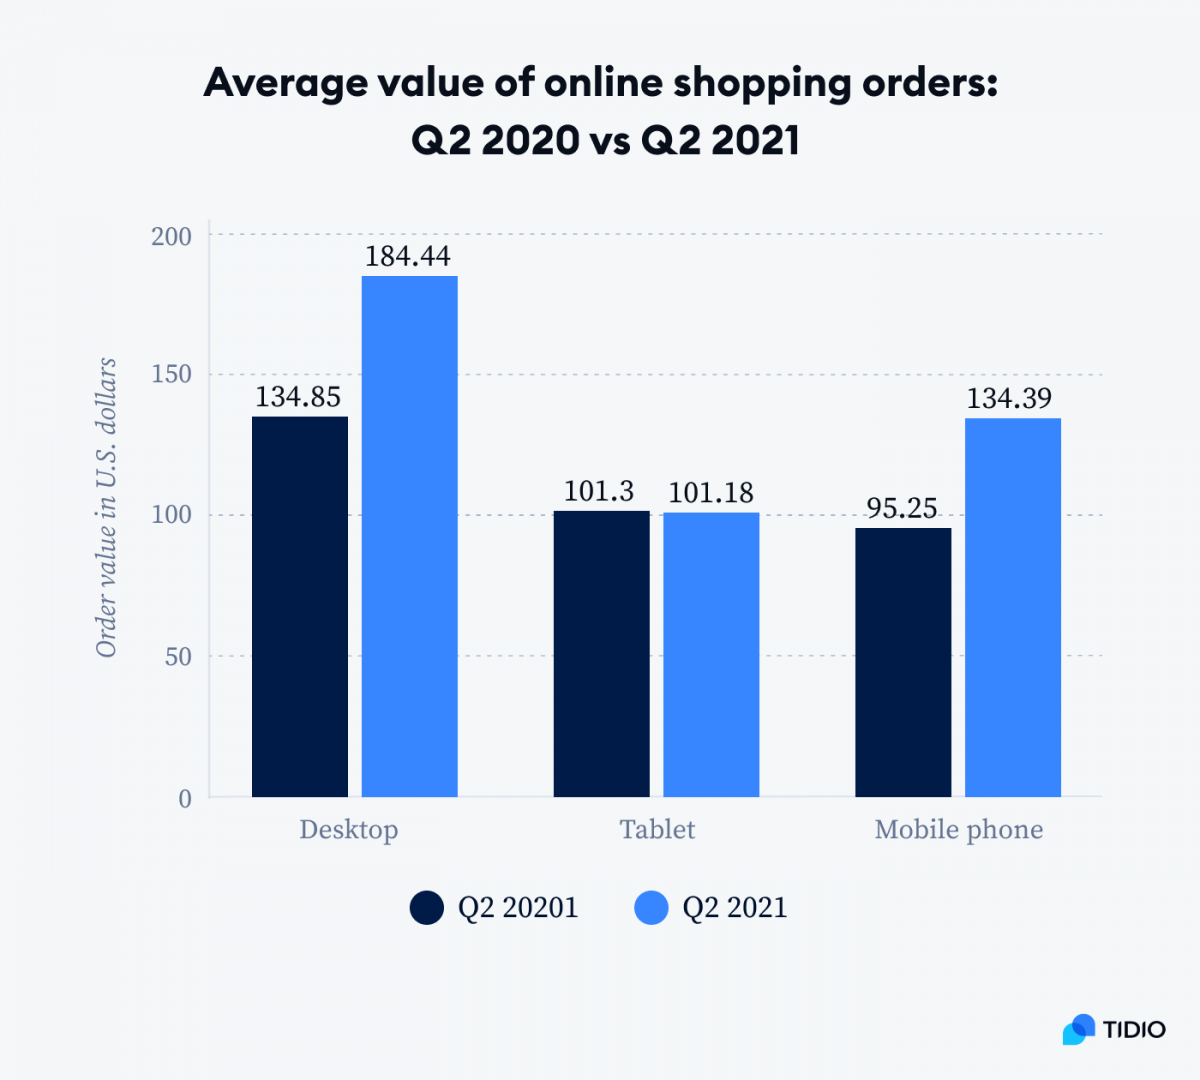 A graph showing average value of online shopping orders in Q2 2020 vs Q2 2021 with a breakdown by device type